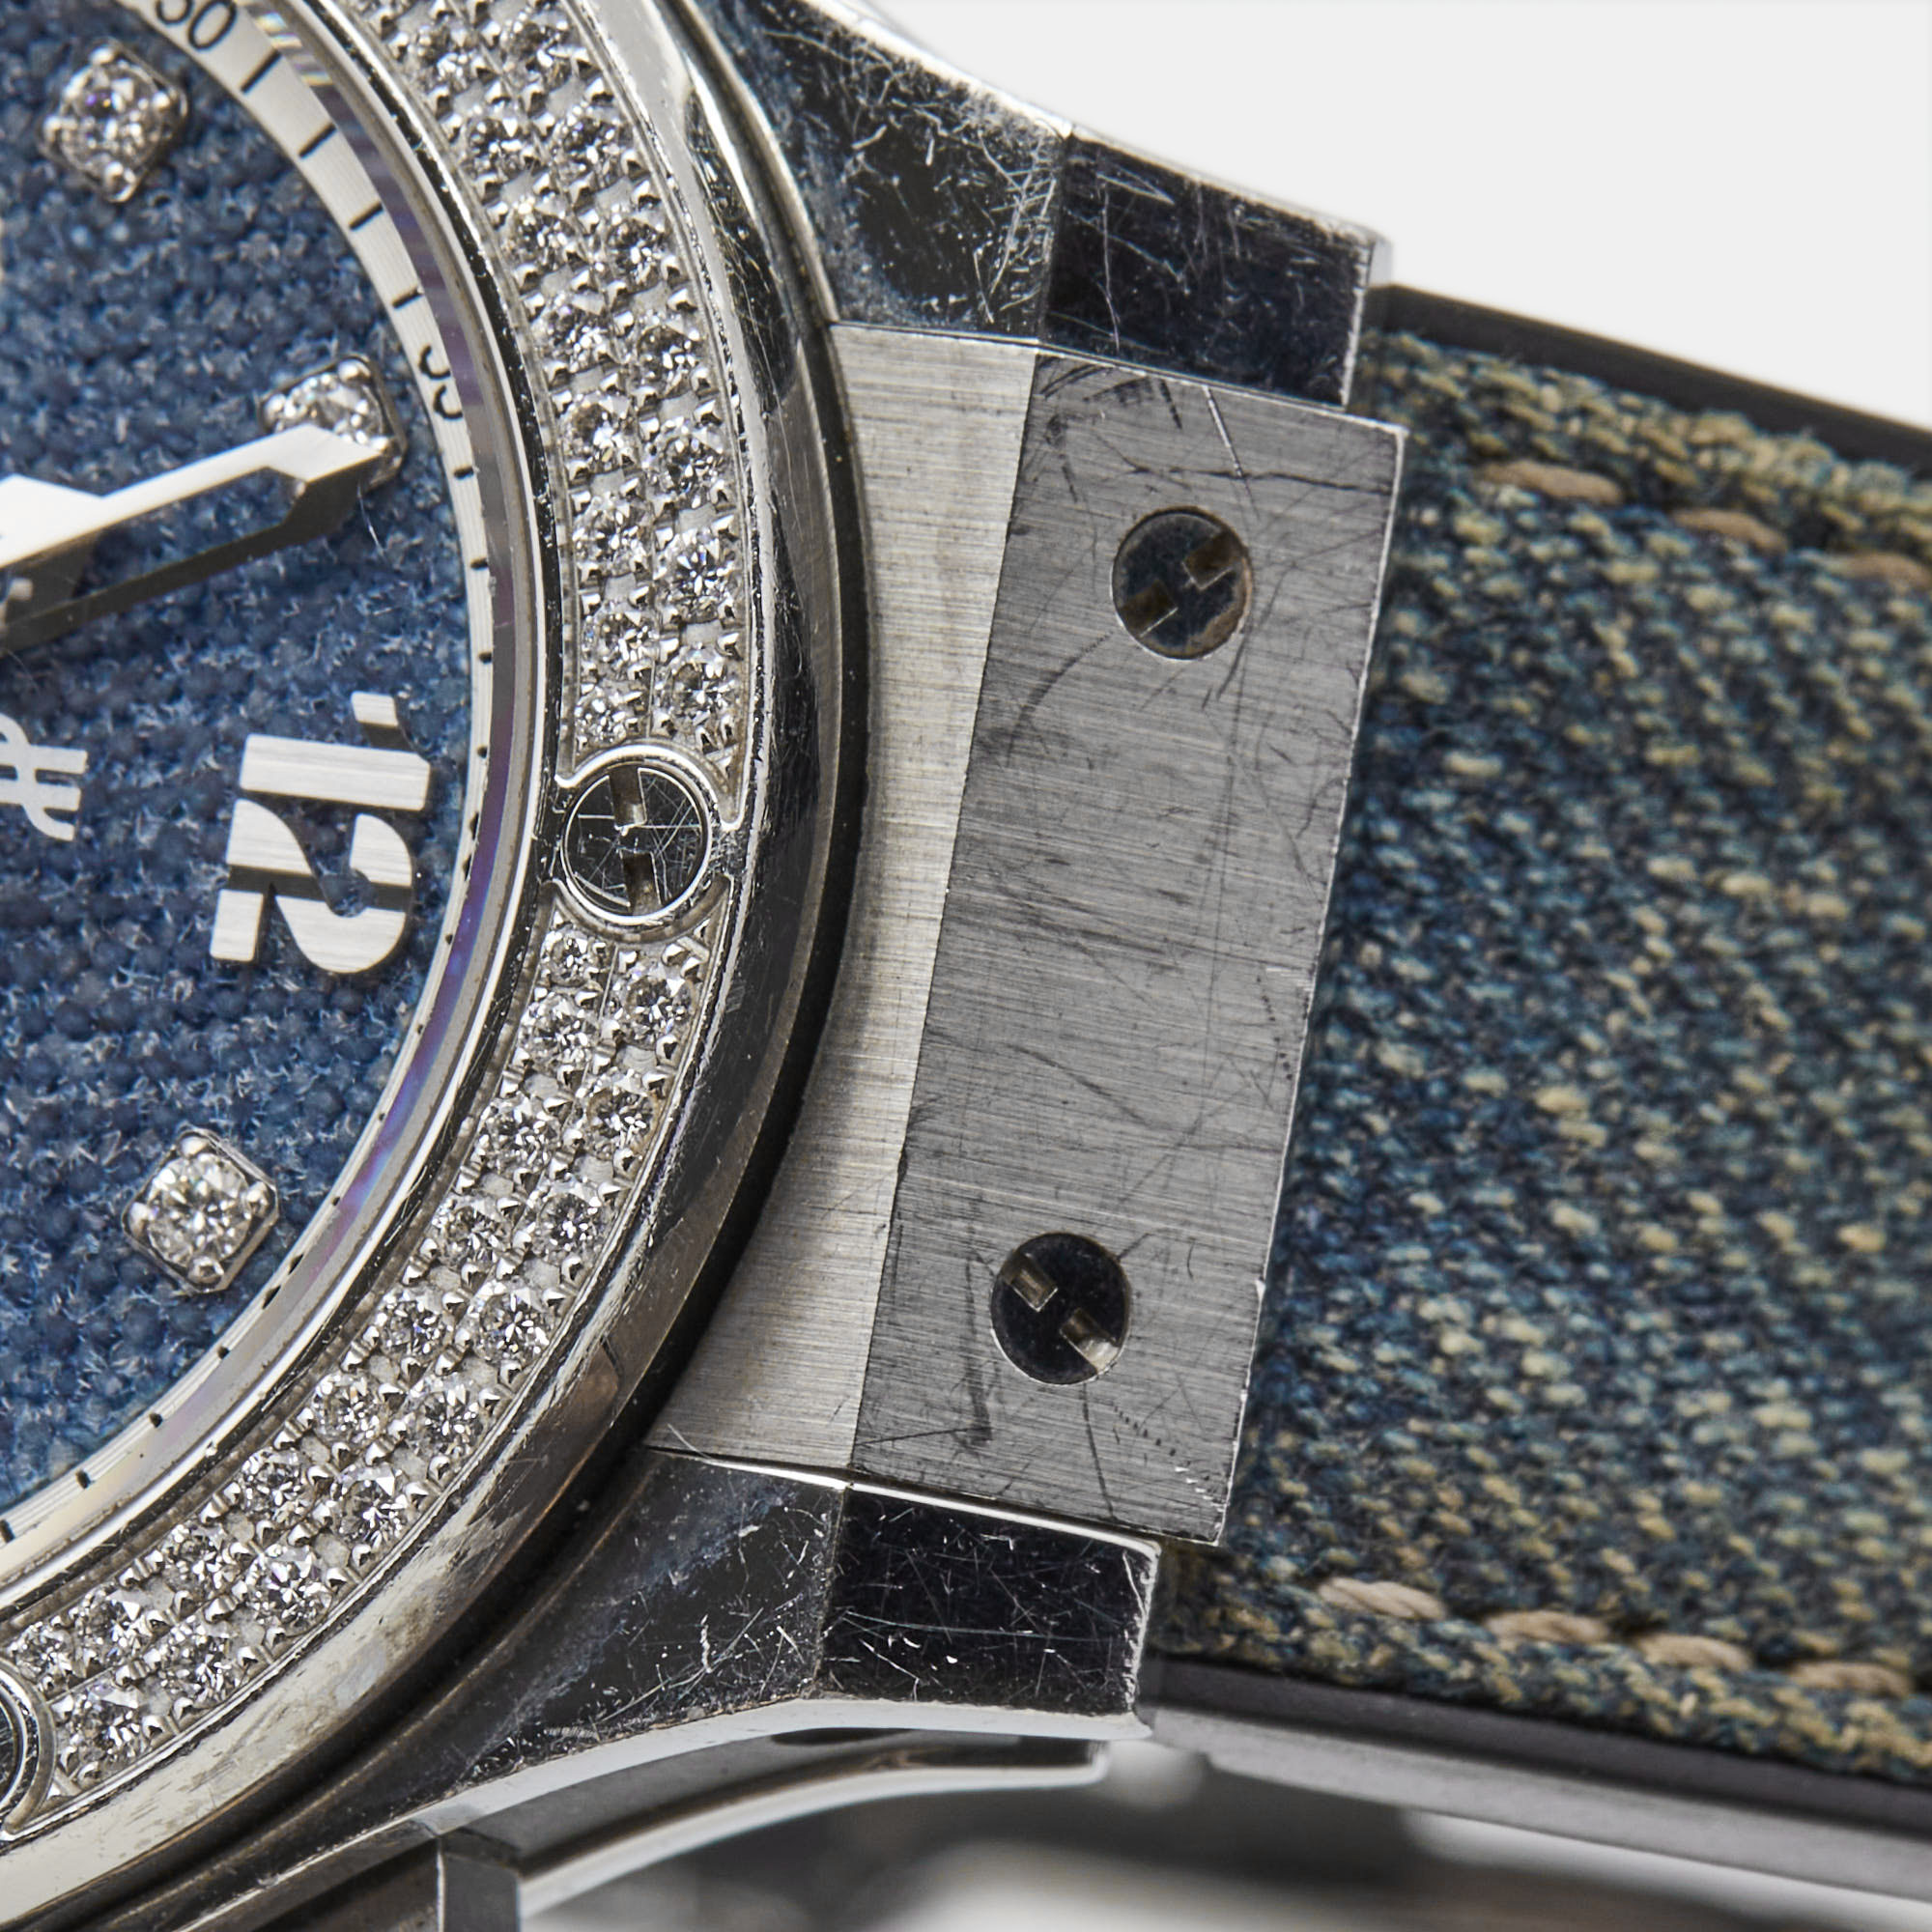 Hublot Blue Stainless Steel Diamond Fabric Rubber Limited Edition Big Bang Jeans 341.SX.2710.NR.1104.JEANS Men's Wristwatch 41 Mm